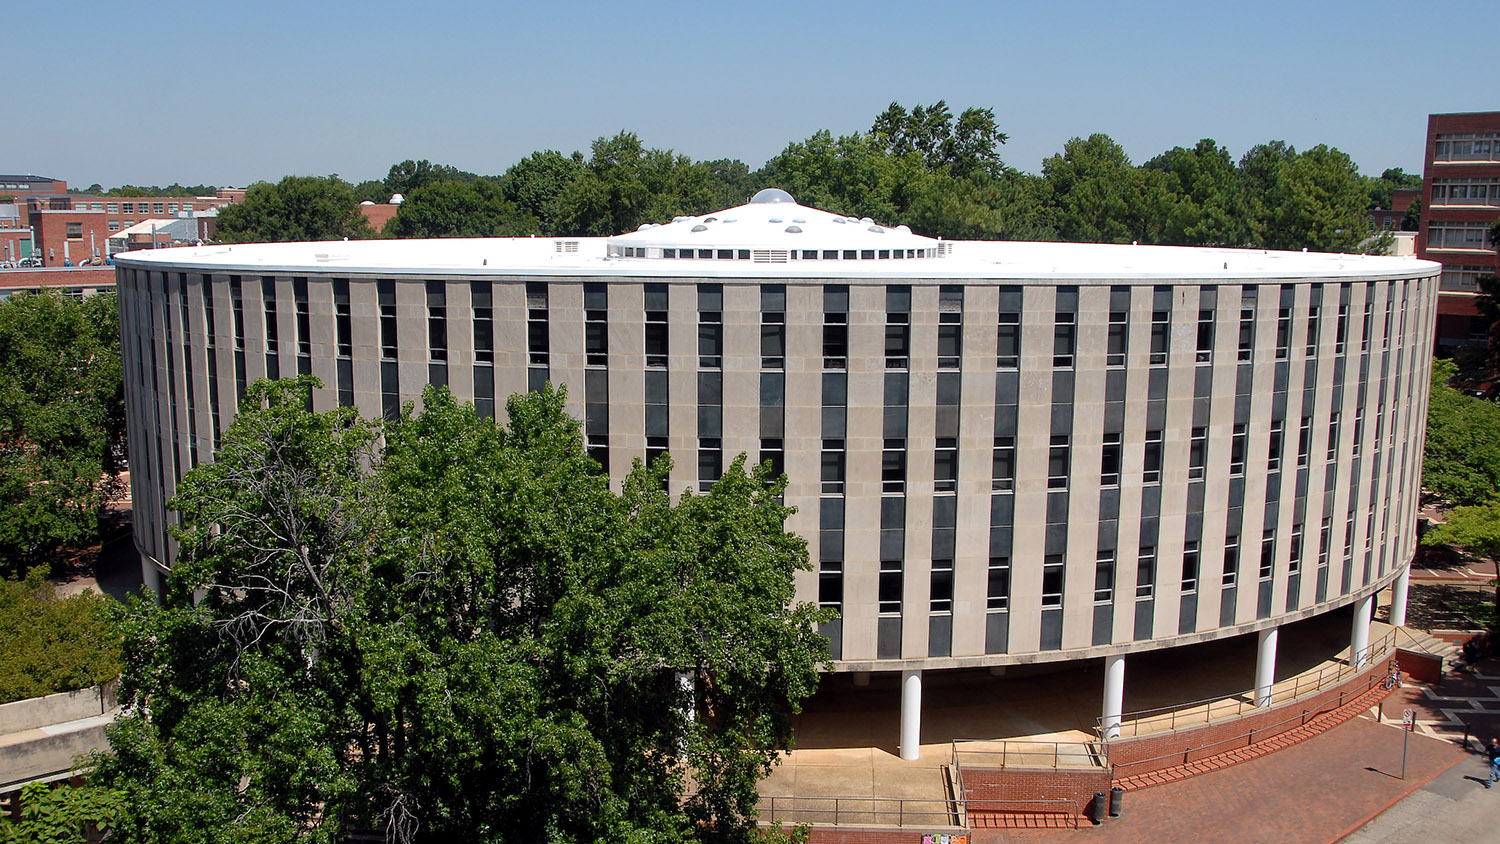 Harrelson Hall on NC State's campus